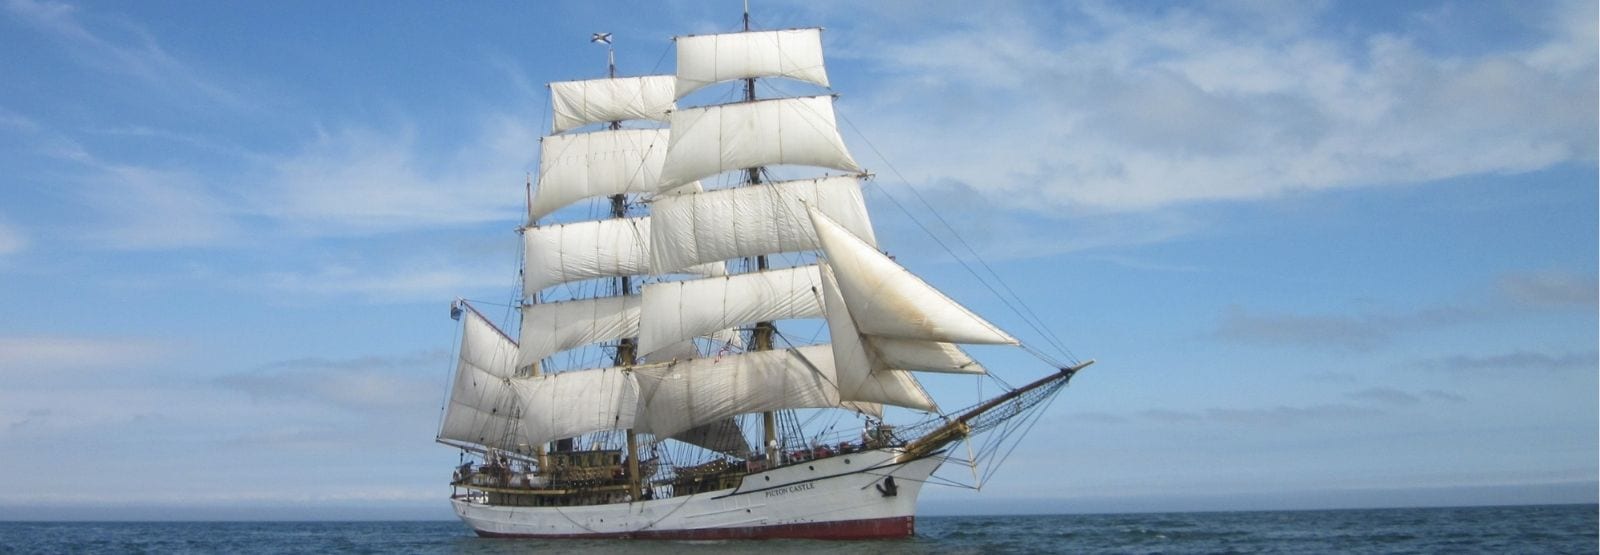 https://www.anotherworldadventures.com/wp-content/uploads/2020/09/Sail-Around-The-World-As-Crew-In-A-Square-Rigger-featured.jpg